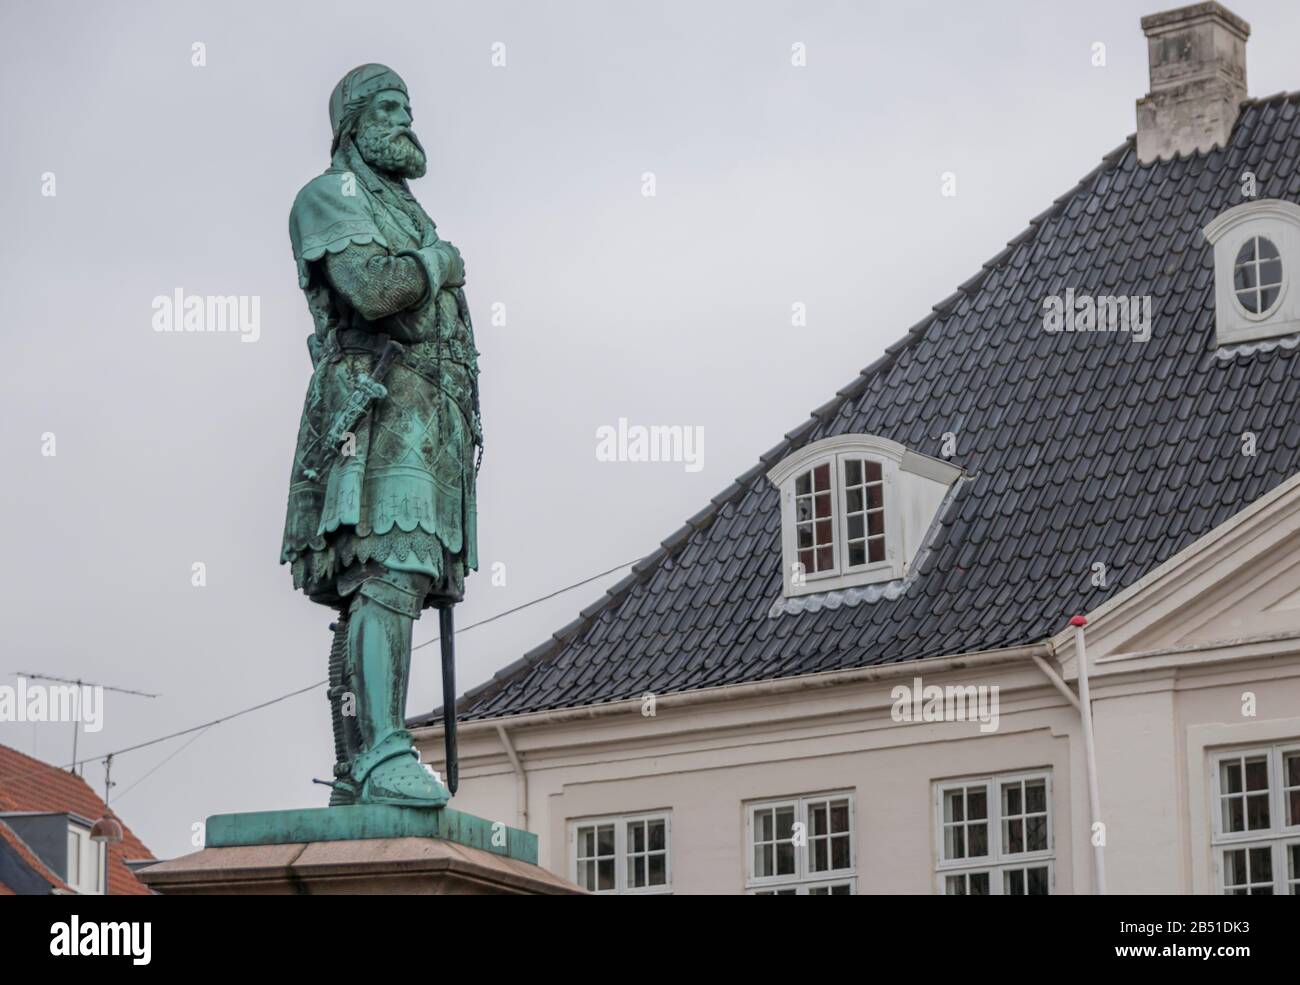 Randers, Denmark - 02 jan 2020: Niels Ebbesen [2] (born 1308 and died November 2, 1340) was a Danish low-noble man who became a national hero when he Stock Photo